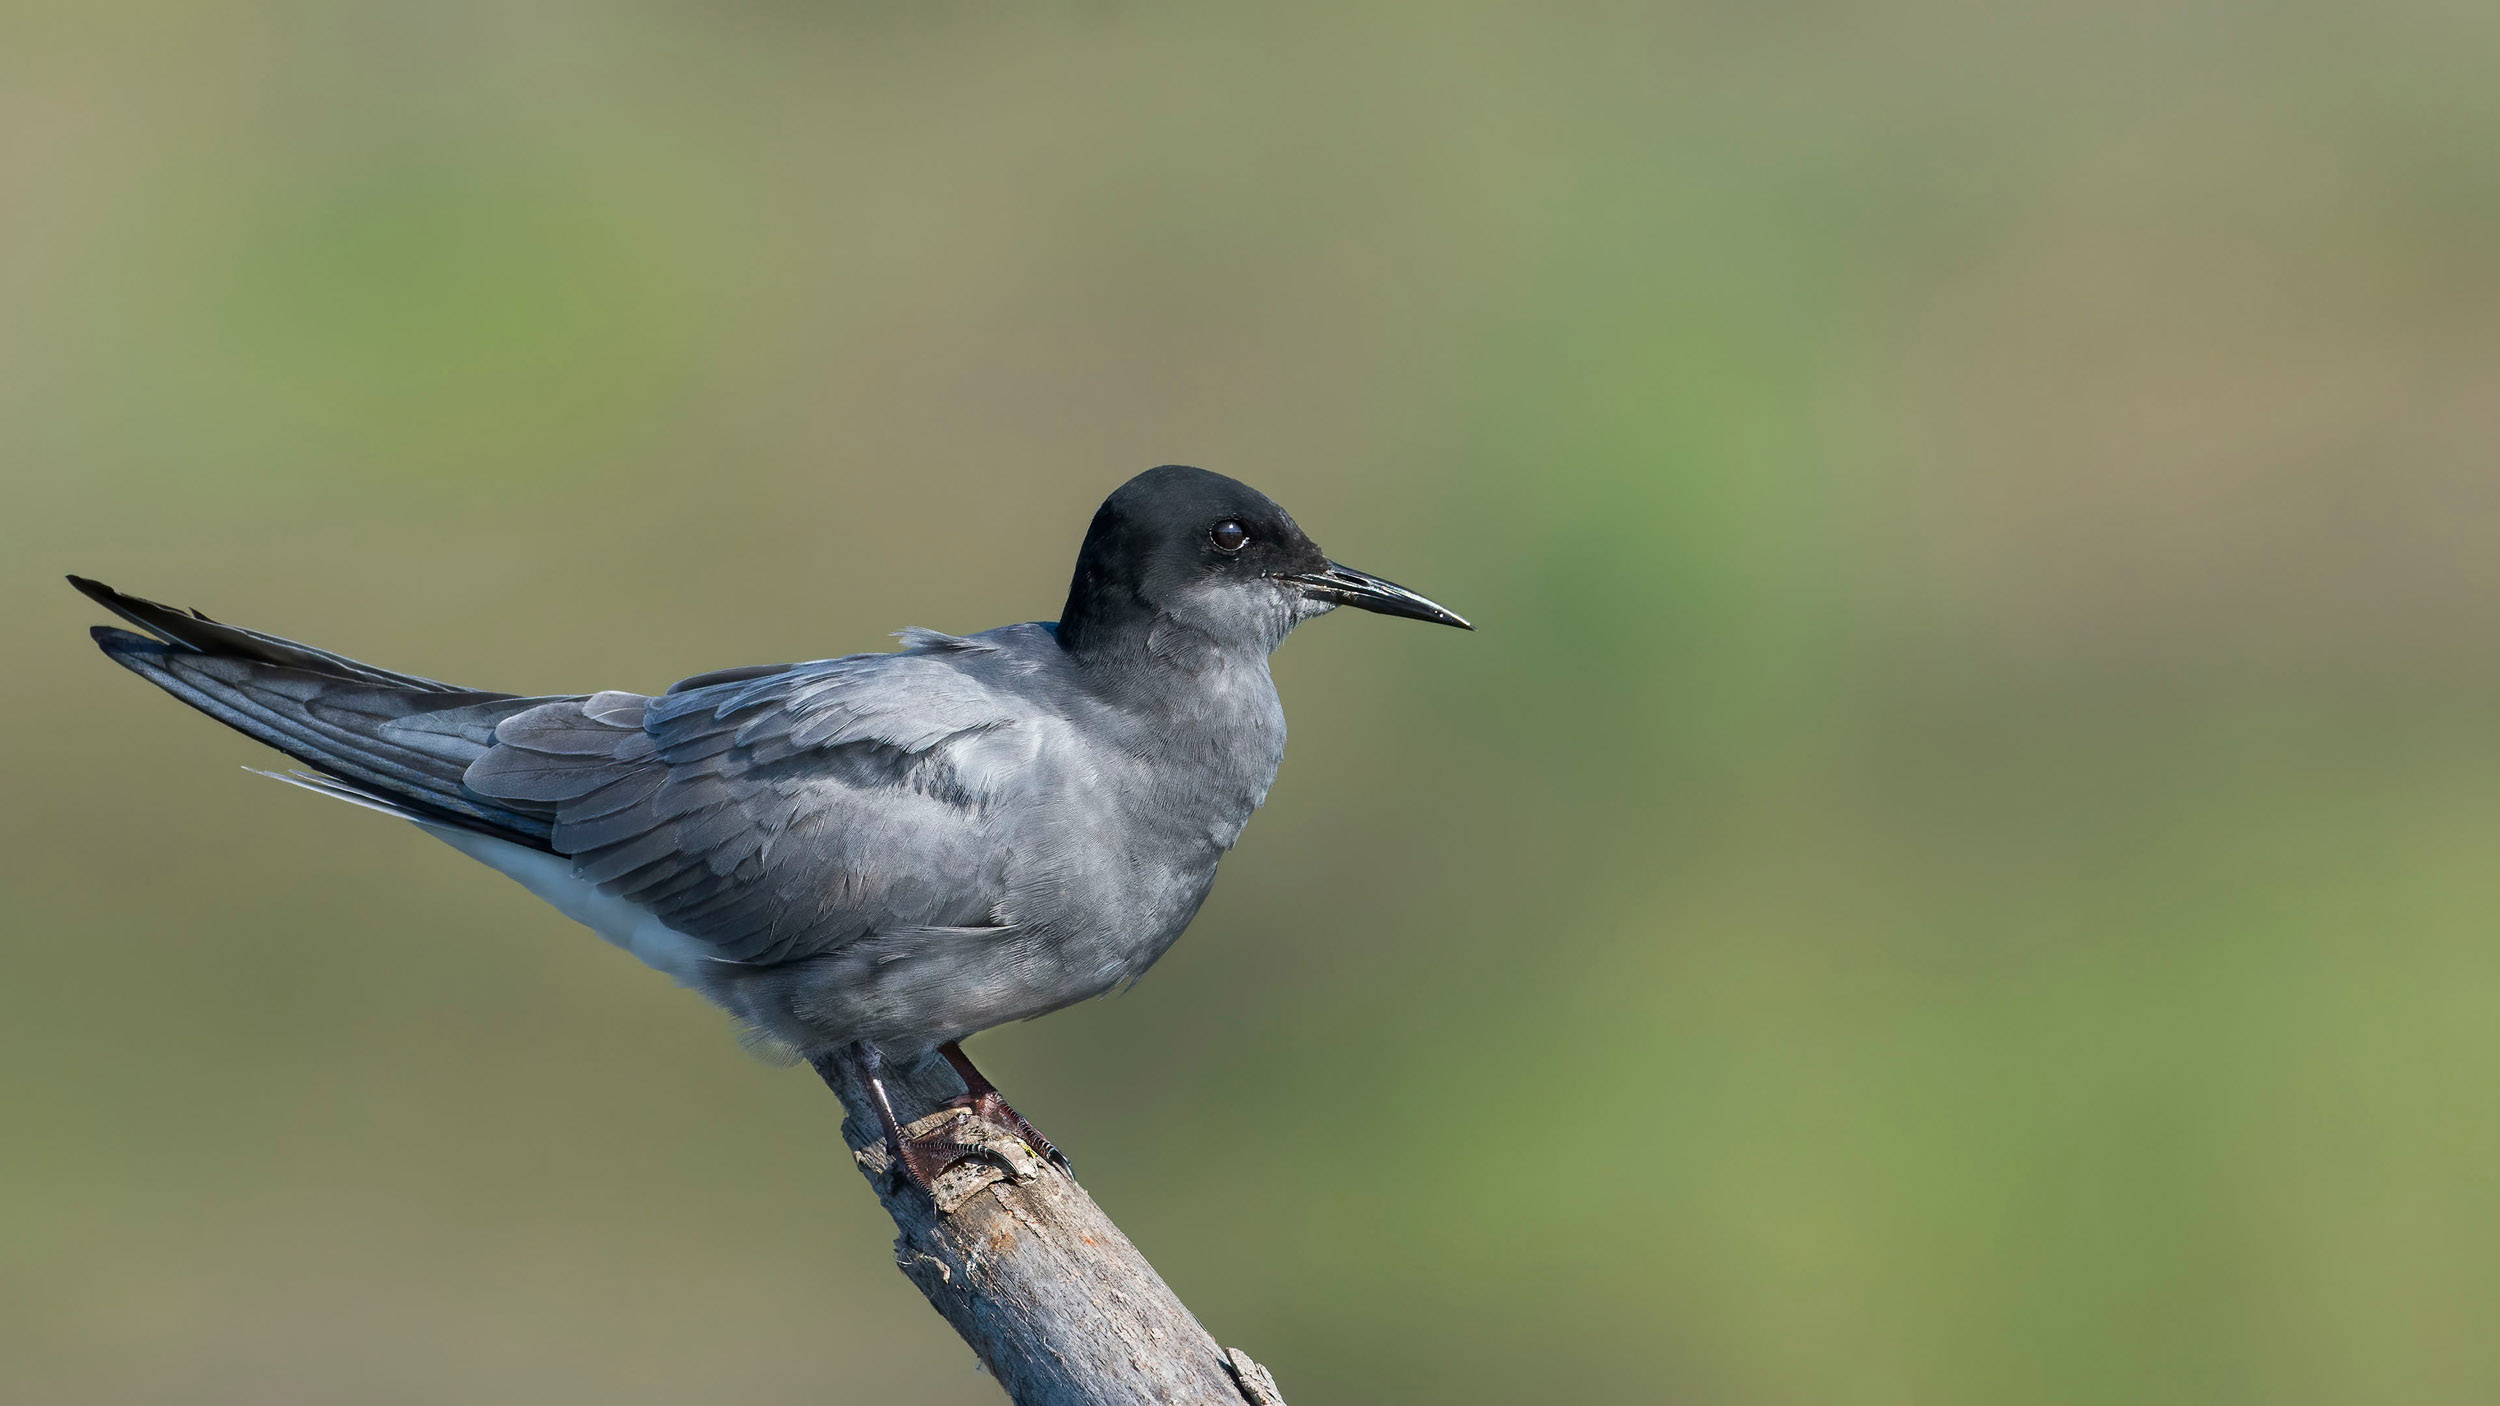 A Black Tern perched on a branch with a blurred woodland background.